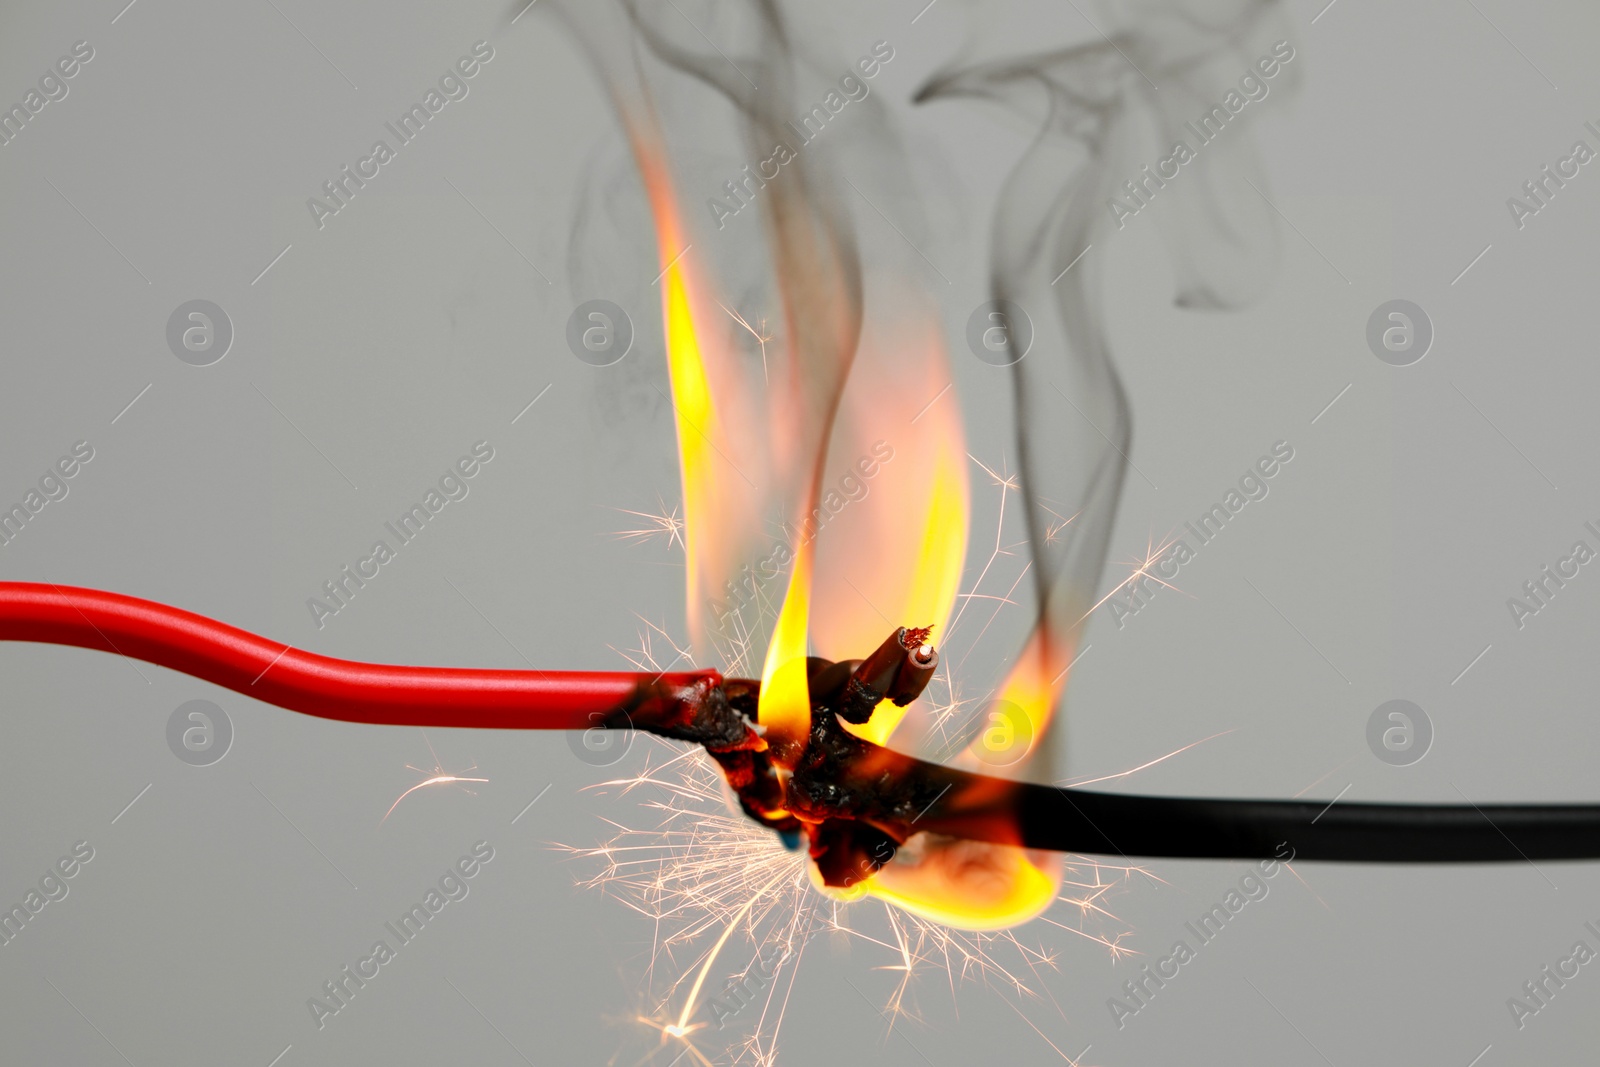 Image of Electrical wire burning and sparking on light background, closeup